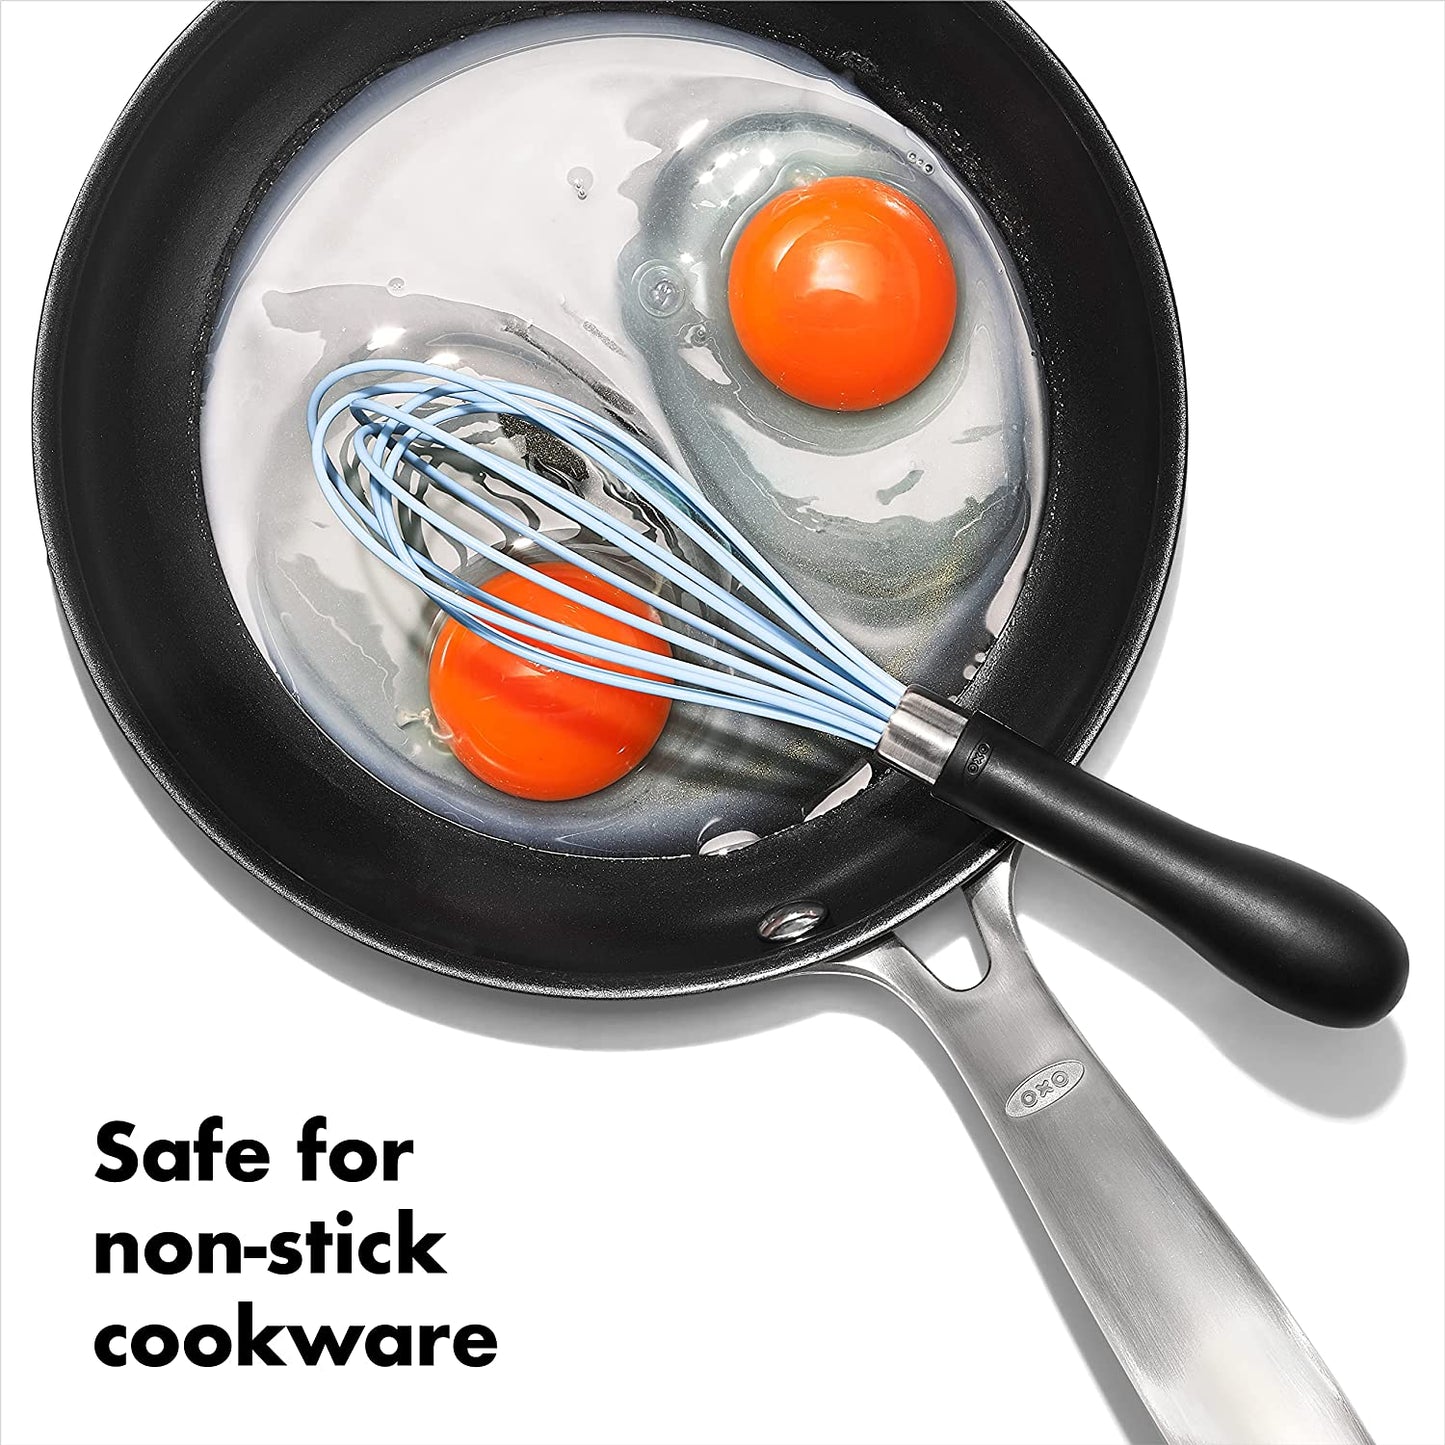 whisk in fry pan filled with eggs and text "safe for non-stick cookware".